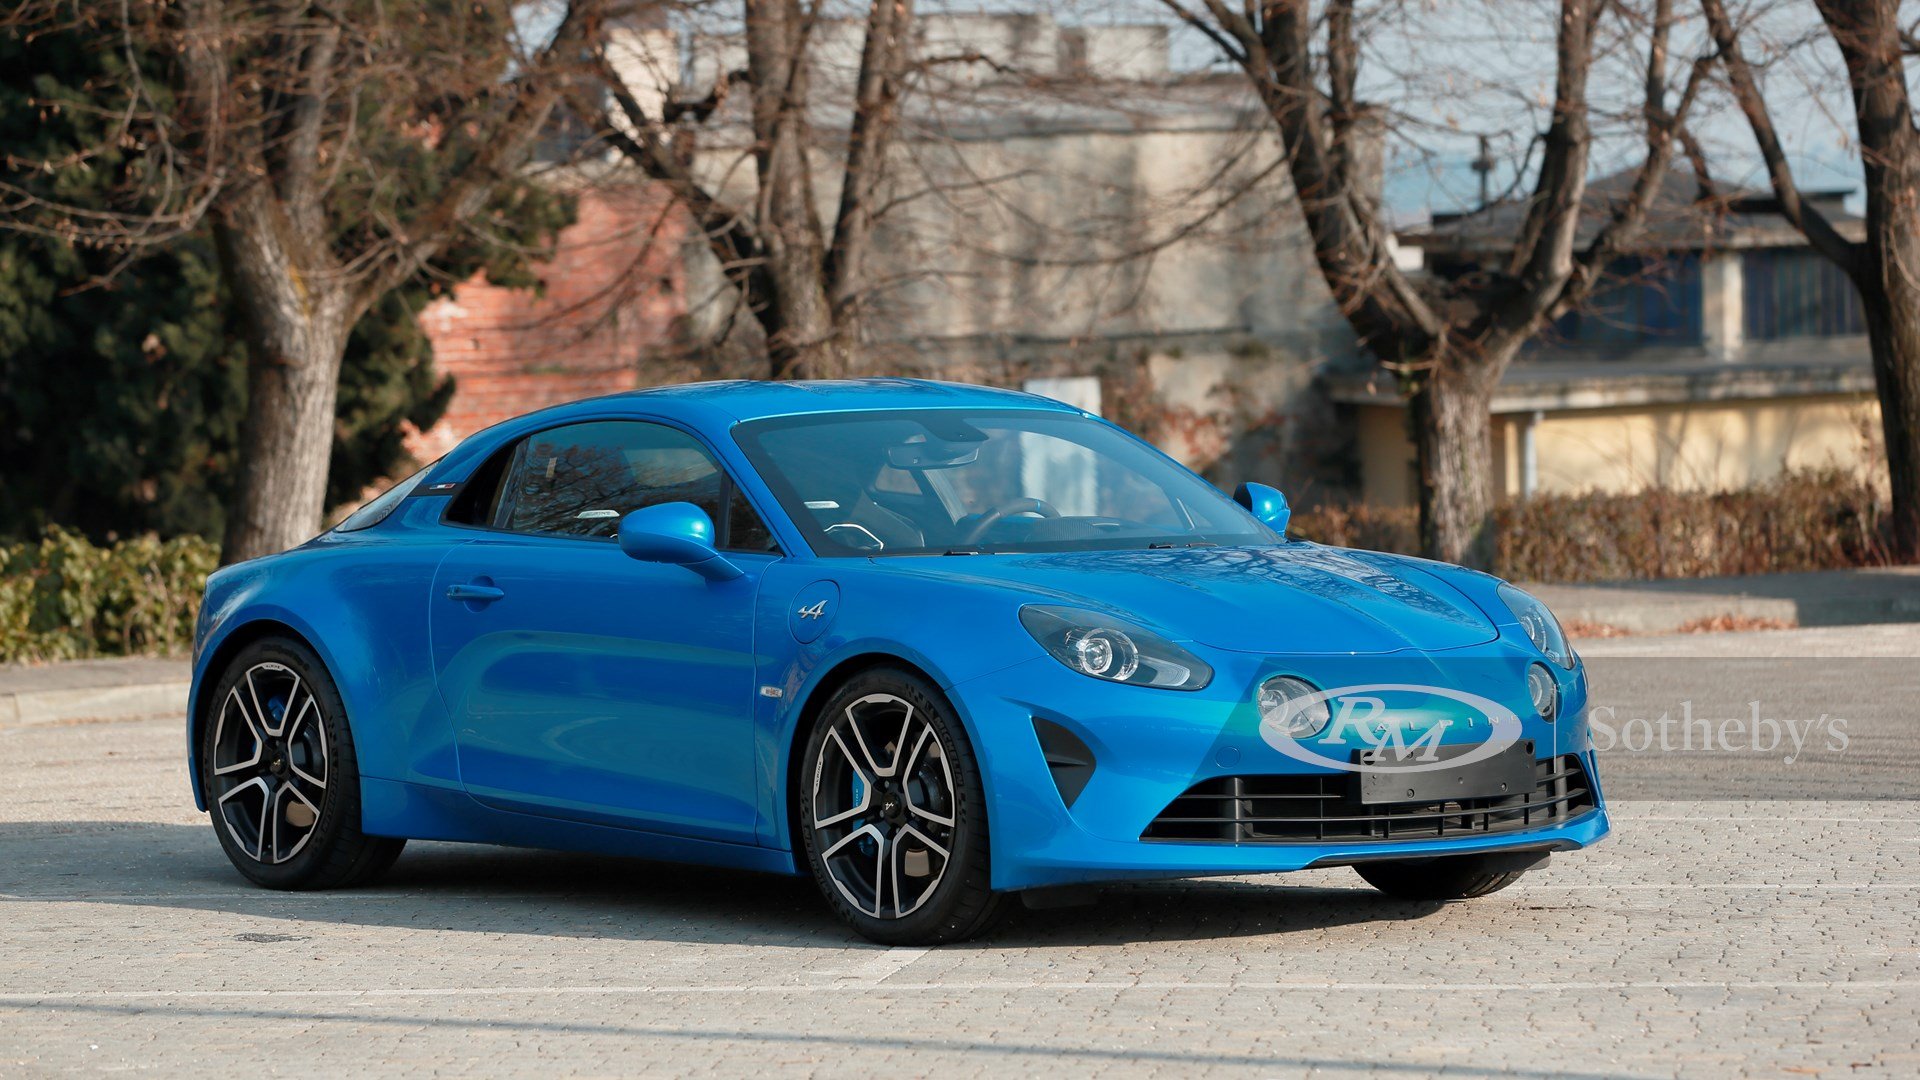 New Renault Alpine A110 Production Car Ready for Geneva